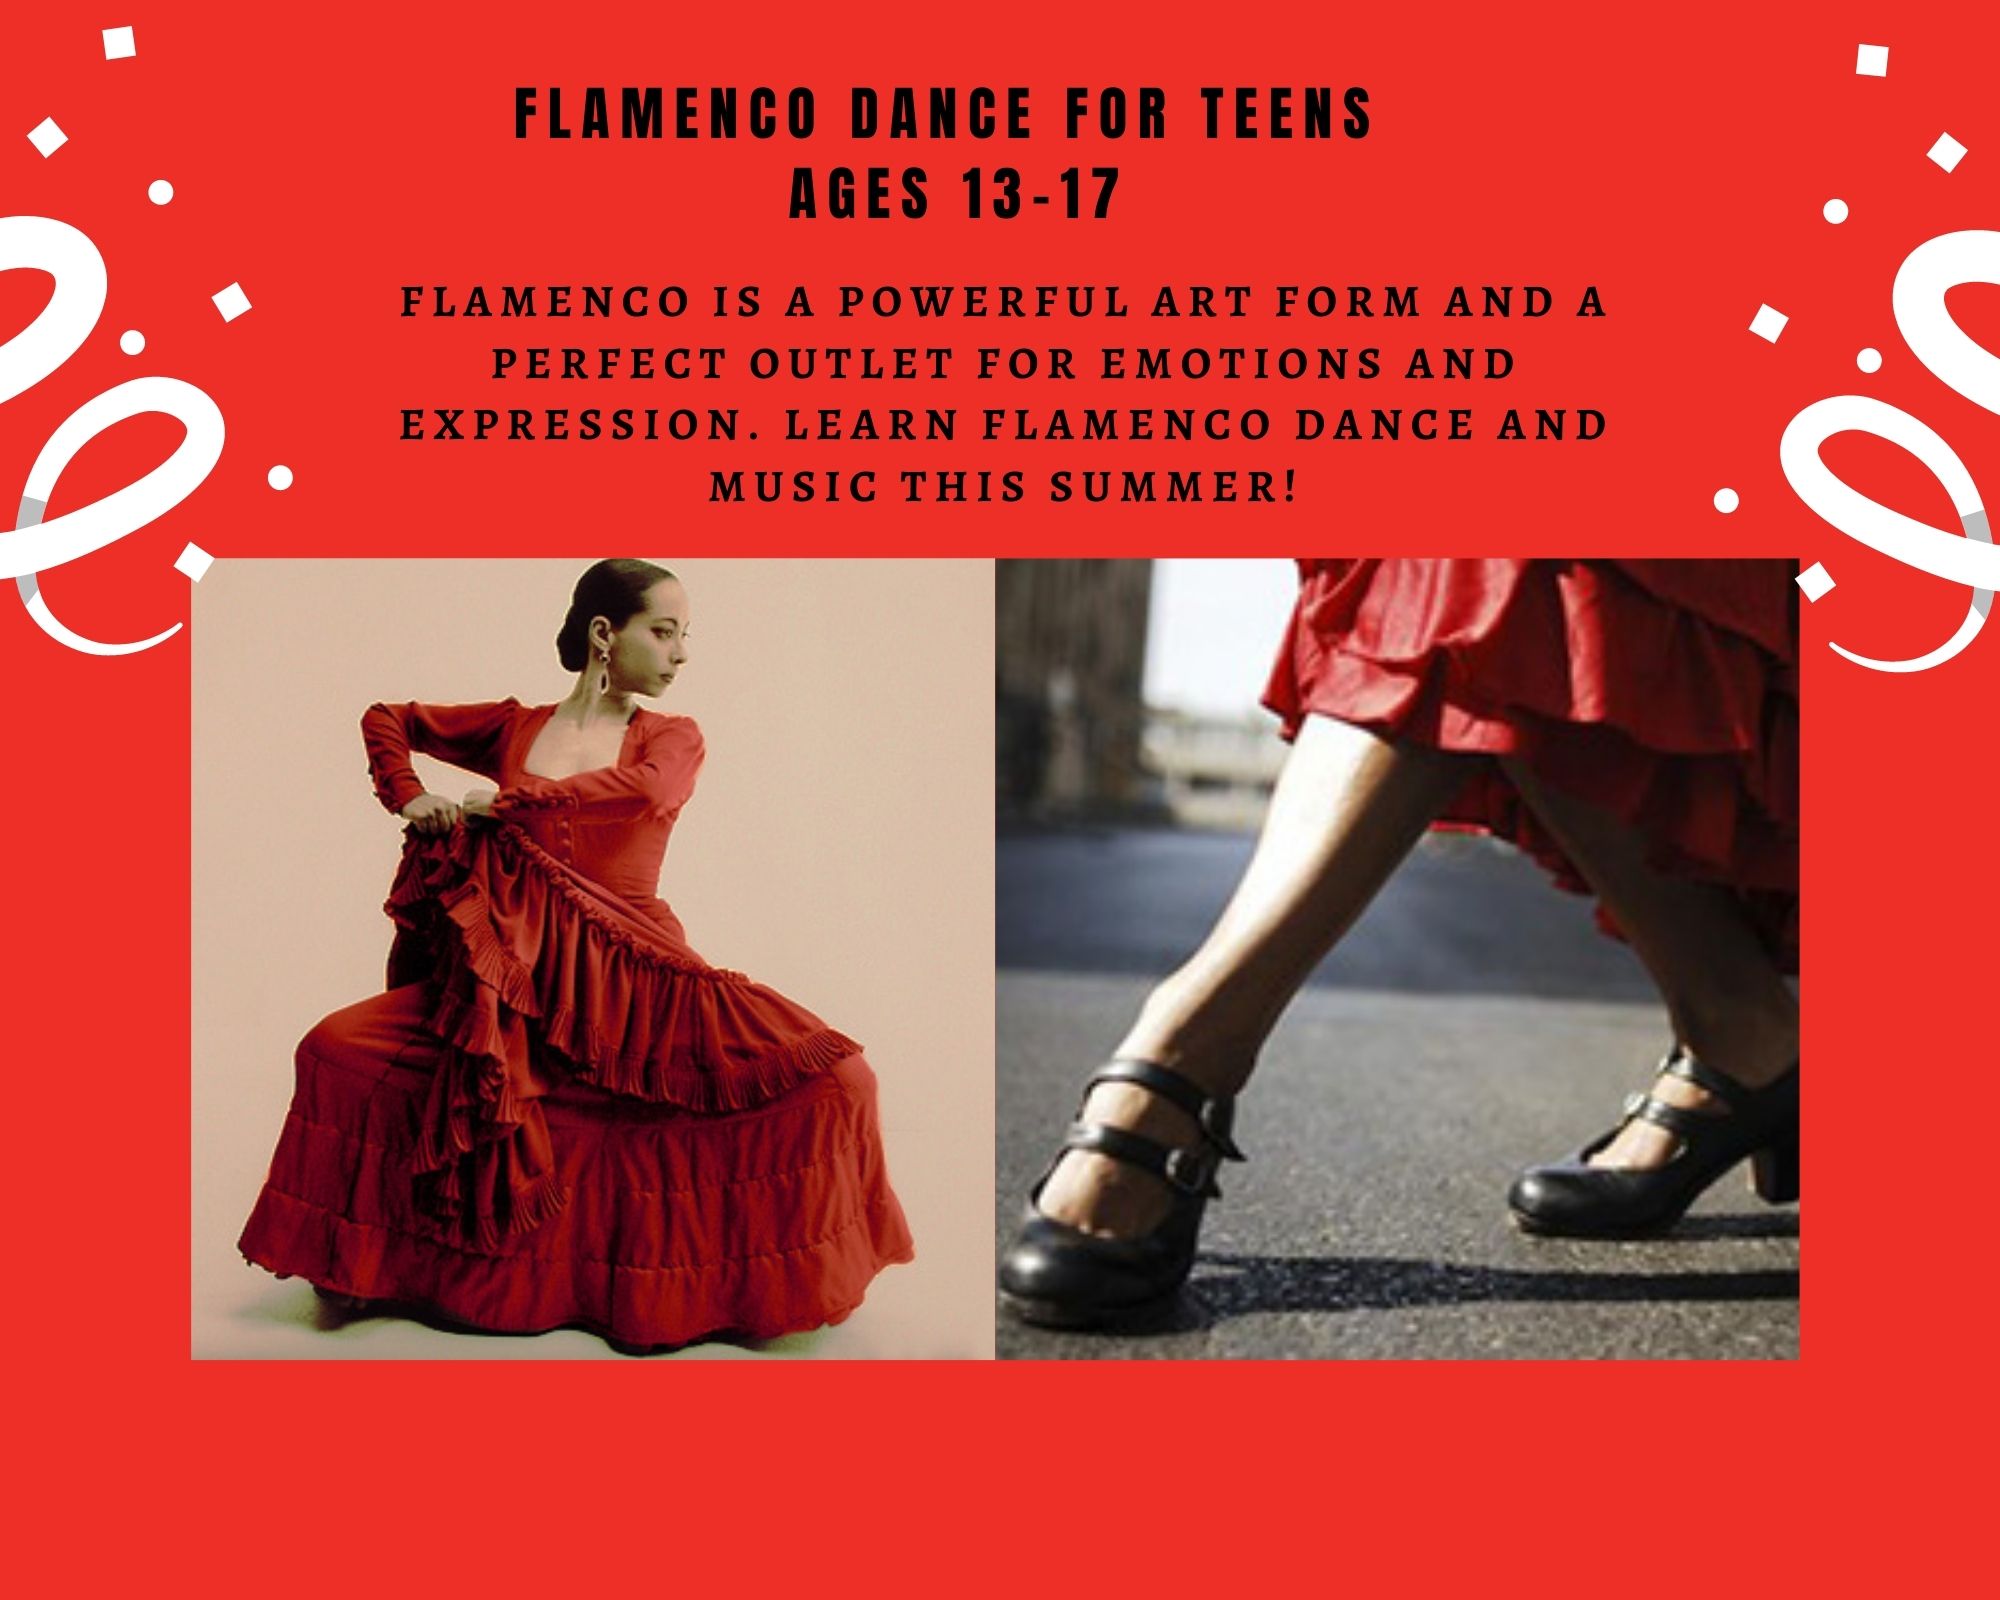 Flamenco Dance for Teens class photo - Continuing Education at Seattle Central College 